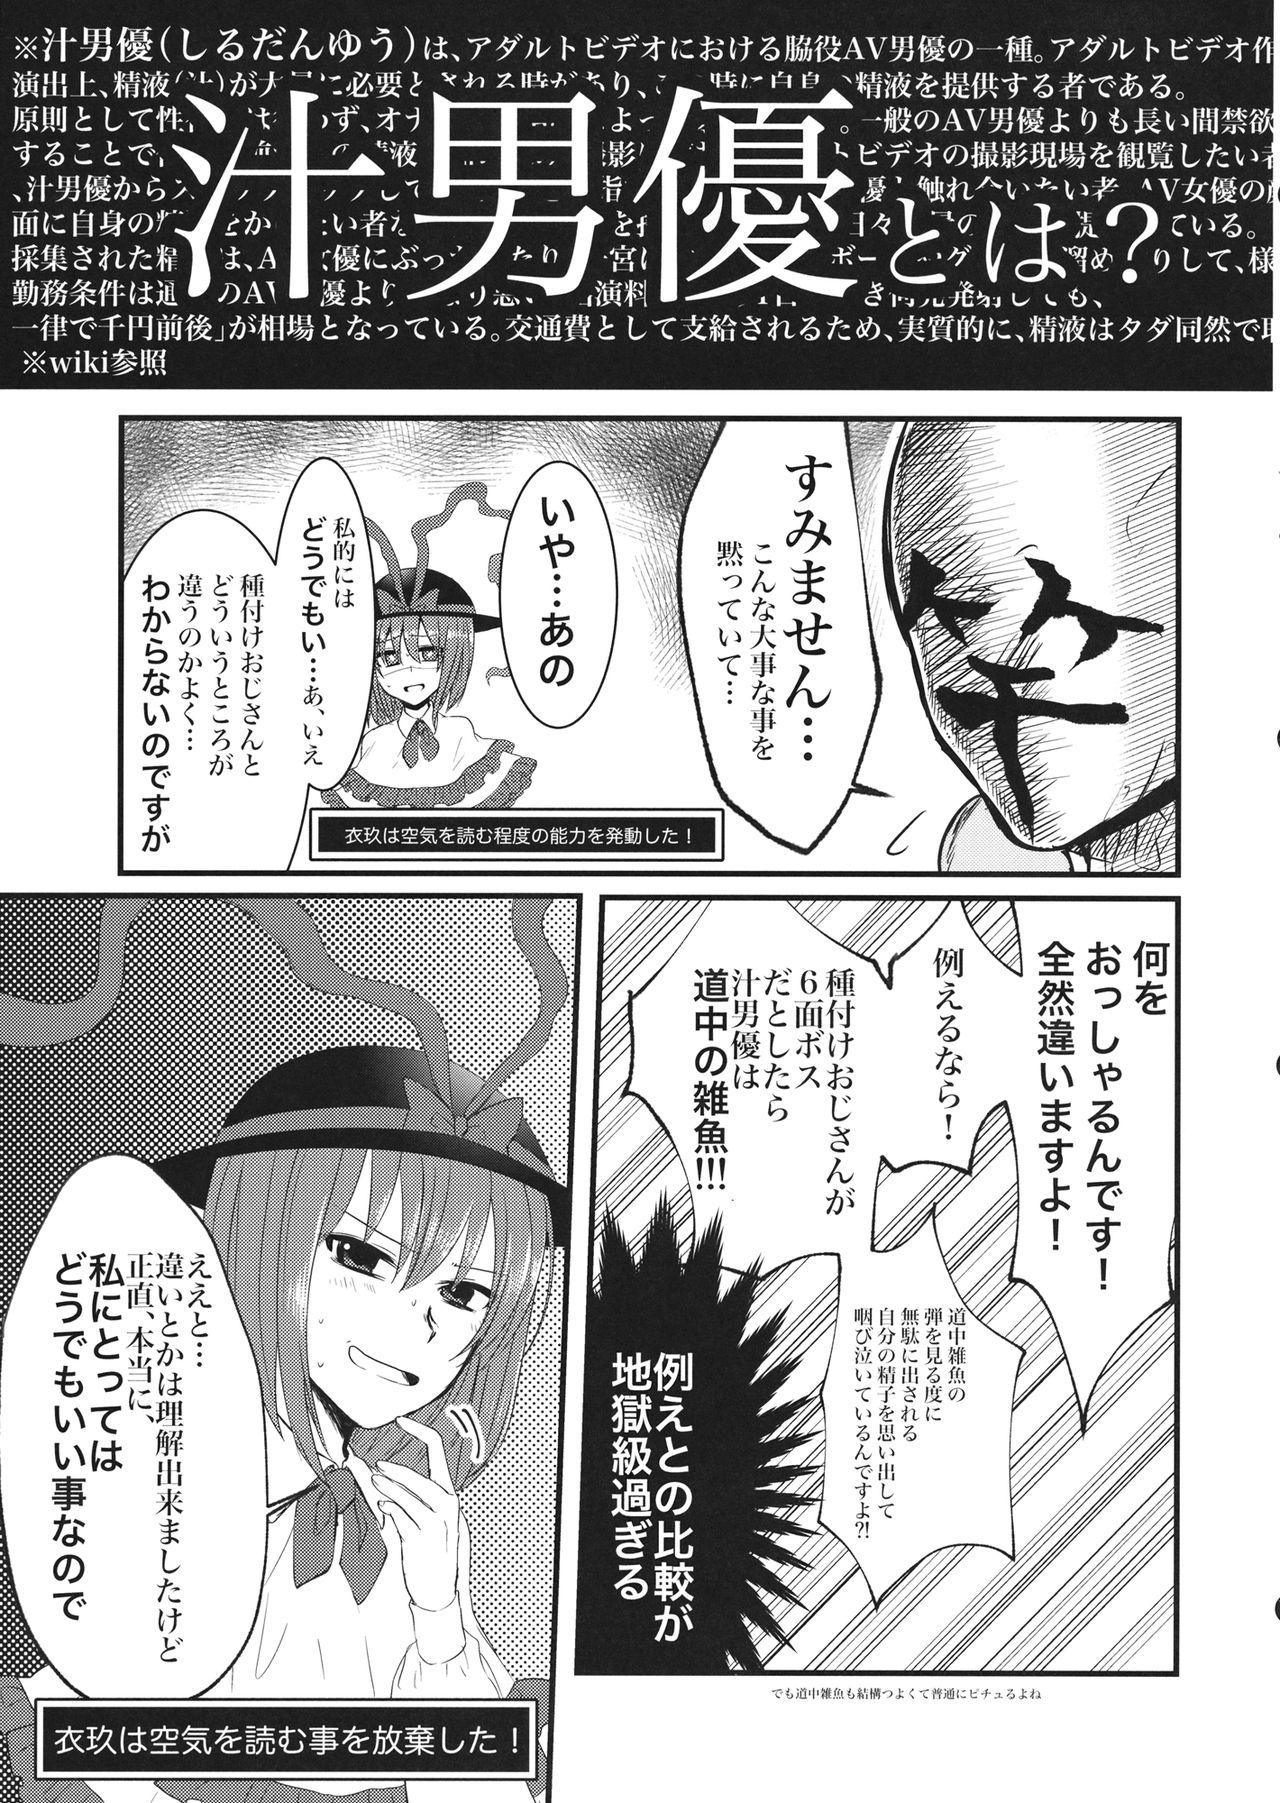 Pica 衣玖さんと一緒に色々頑張る本 - Touhou project Shavedpussy - Page 6